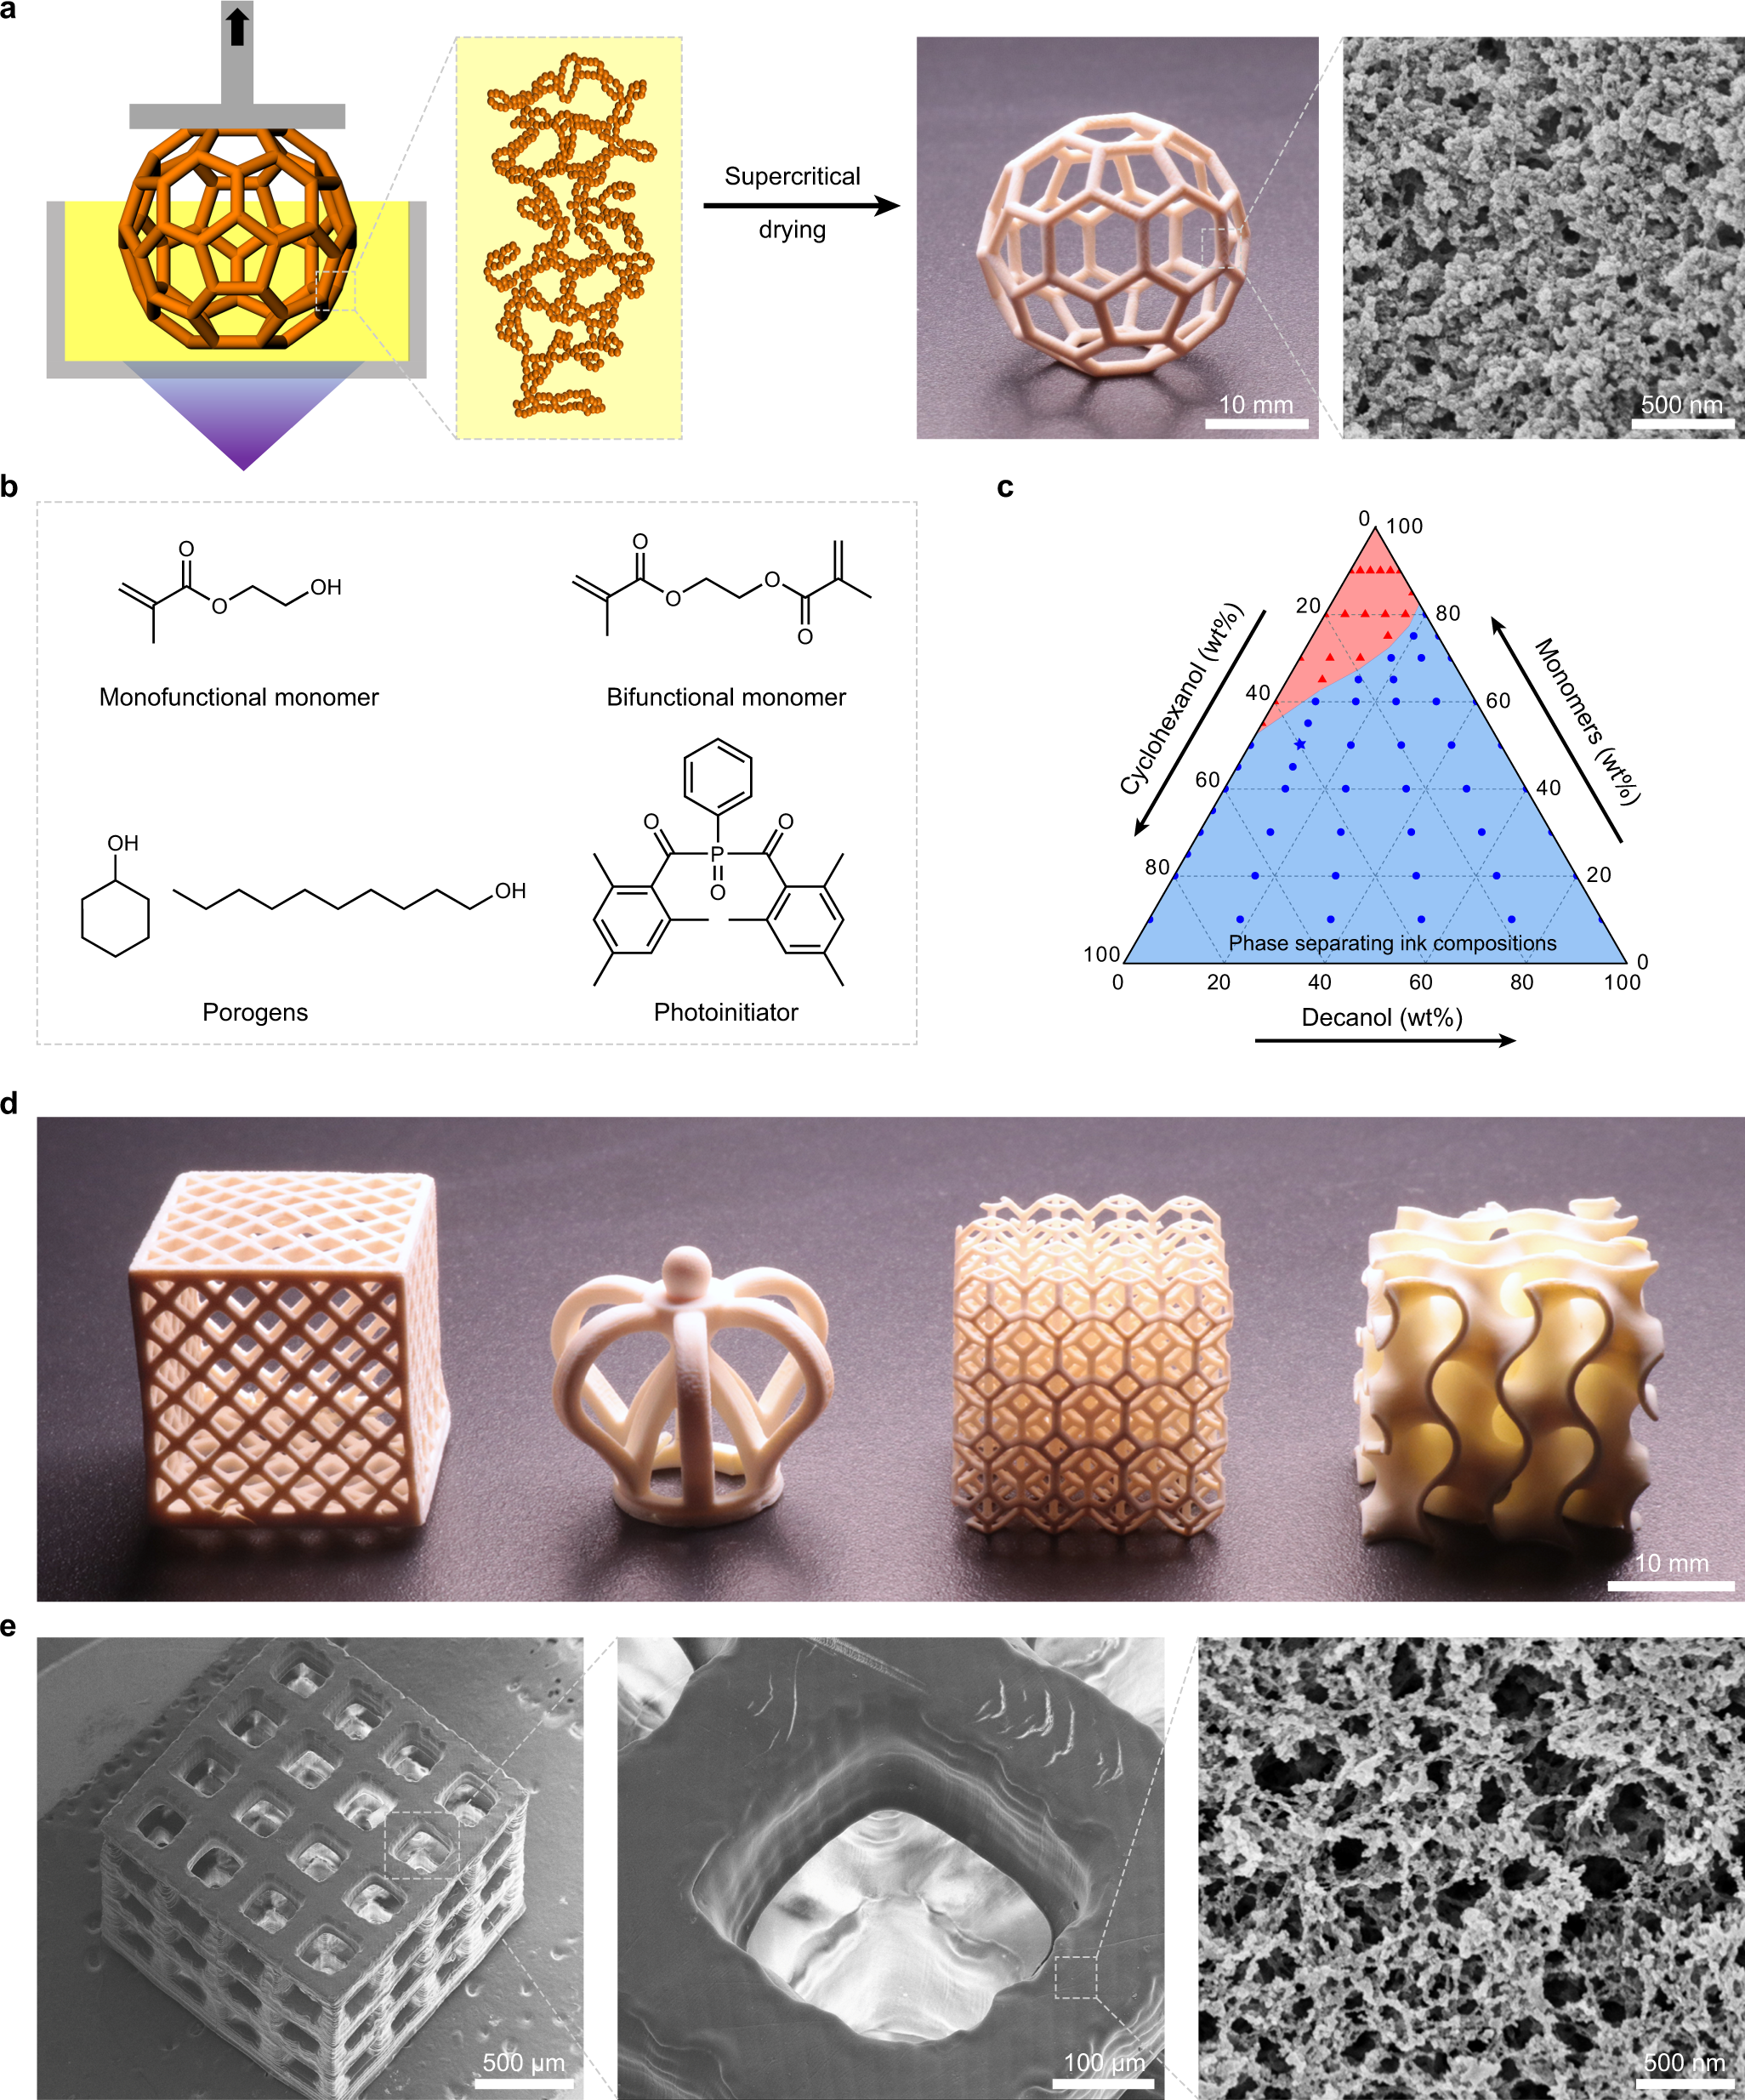 3D printing of inherently nanoporous polymers via polymerization-induced phase separation | Nature